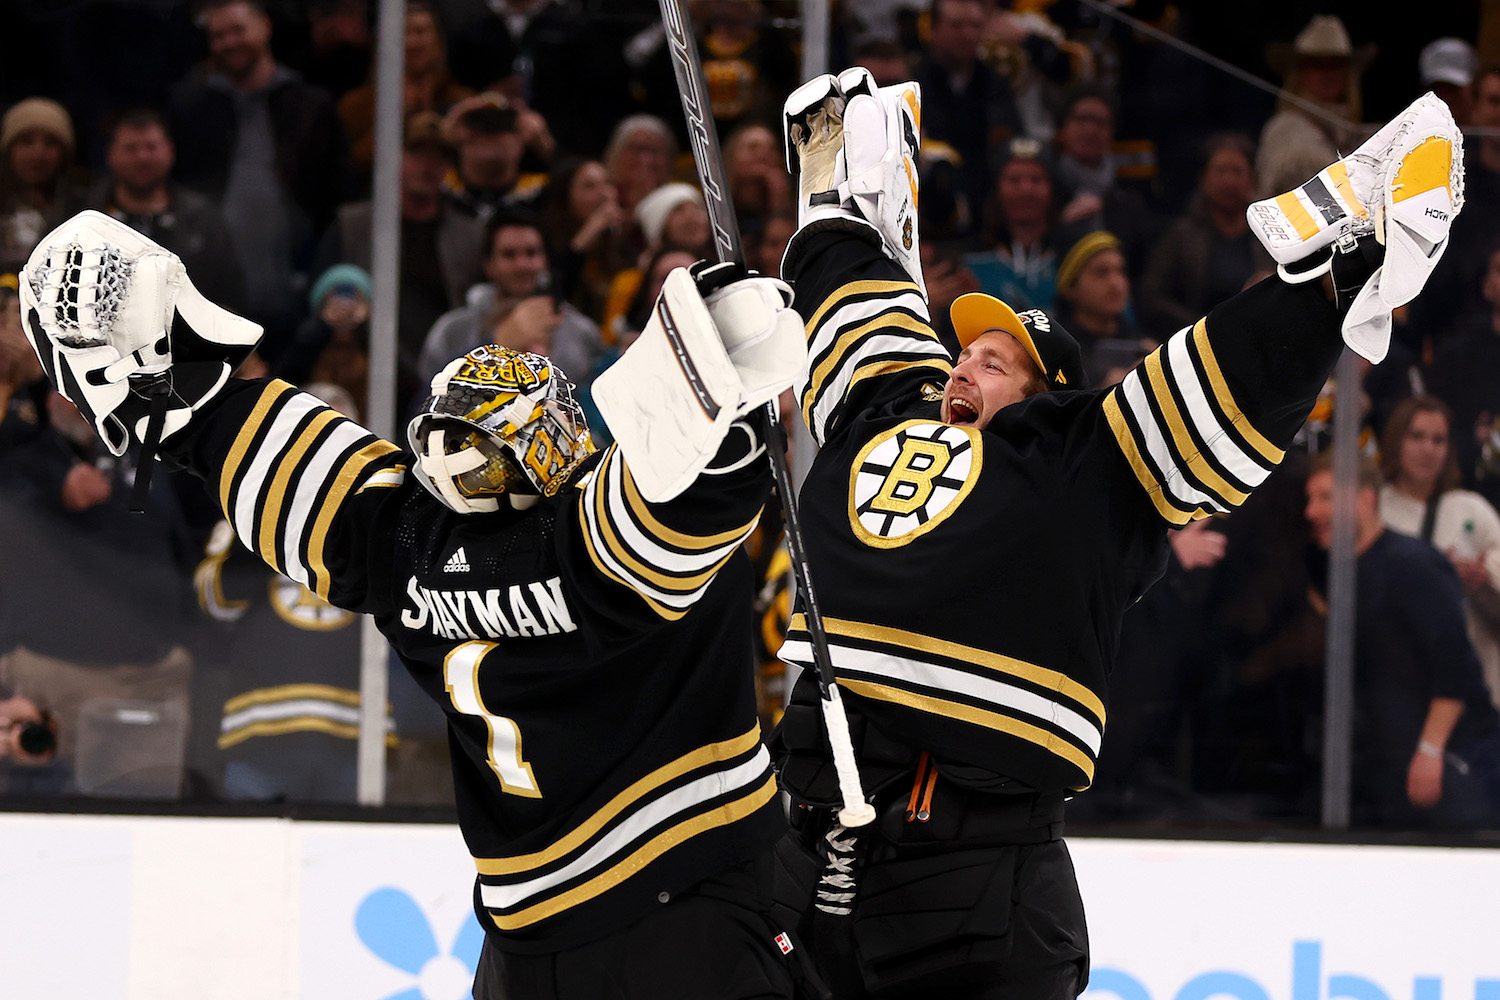 BOSTON, MASSACHUSETTS - NOVEMBER 30: Jeremy Swayman #1 of the Boston Bruins and Linus Ullmark #35 celebrate after the Bruins defeat the San Jose Sharks 3-0 at TD Garden on November 30, 2023 in Boston, Massachusetts. (Photo by Maddie Meyer/Getty Images)